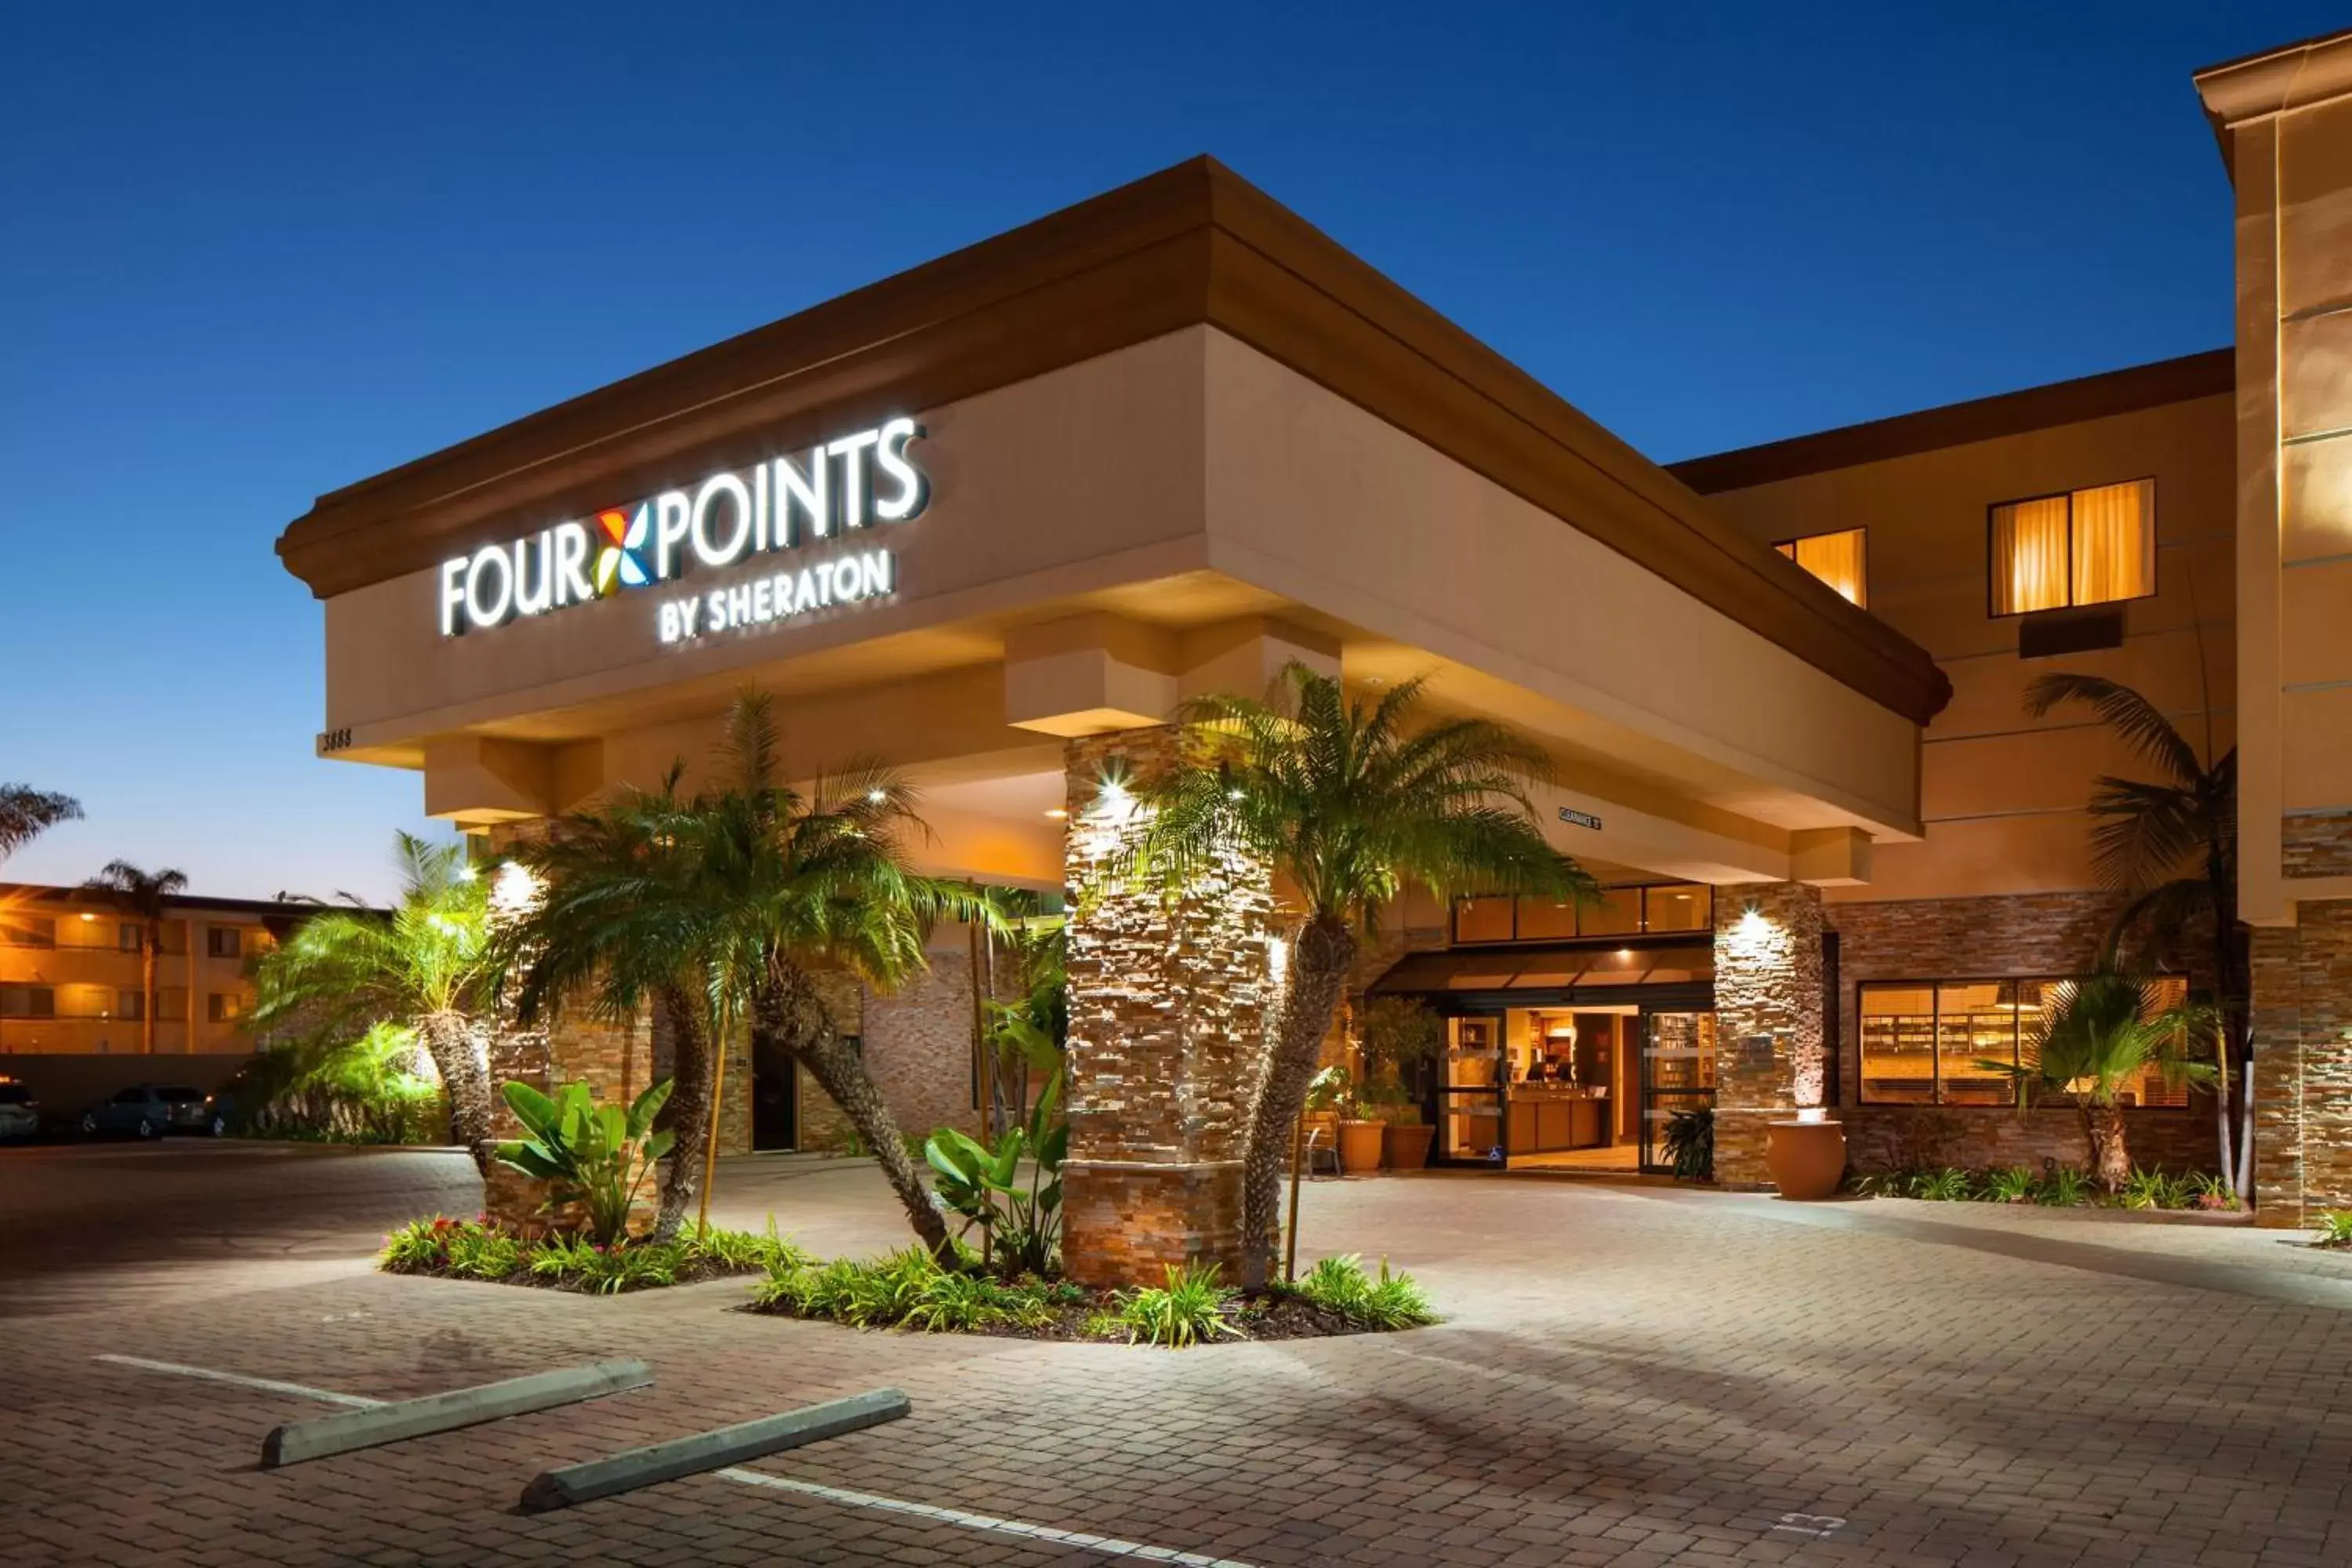 Property Building in Four Points by Sheraton San Diego - Sea World